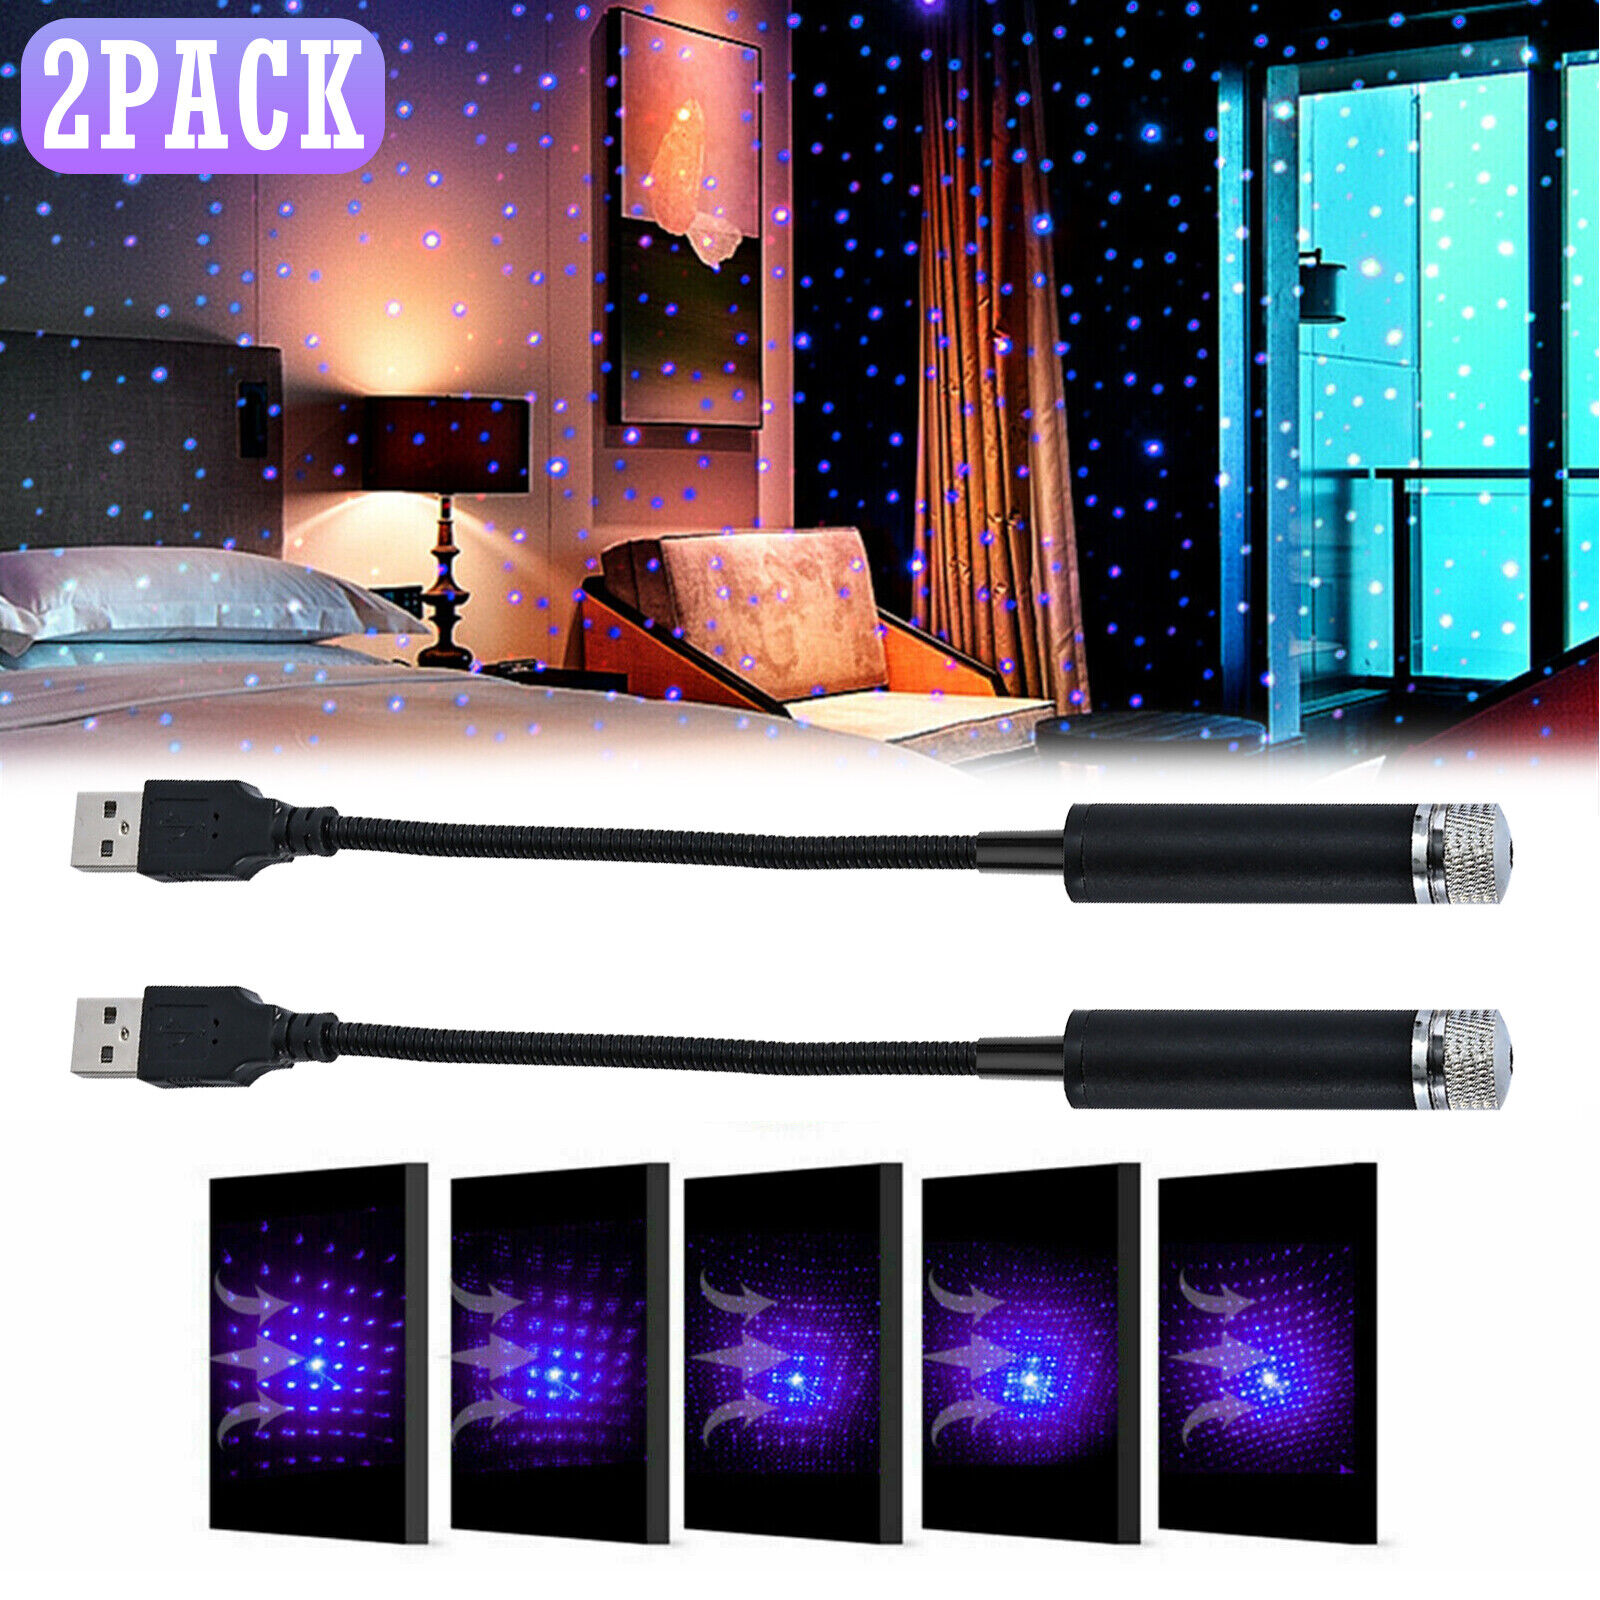 2pc Car Interior Roof LED Star Light USB Atmosphere Starry Sky Projector Lamp 